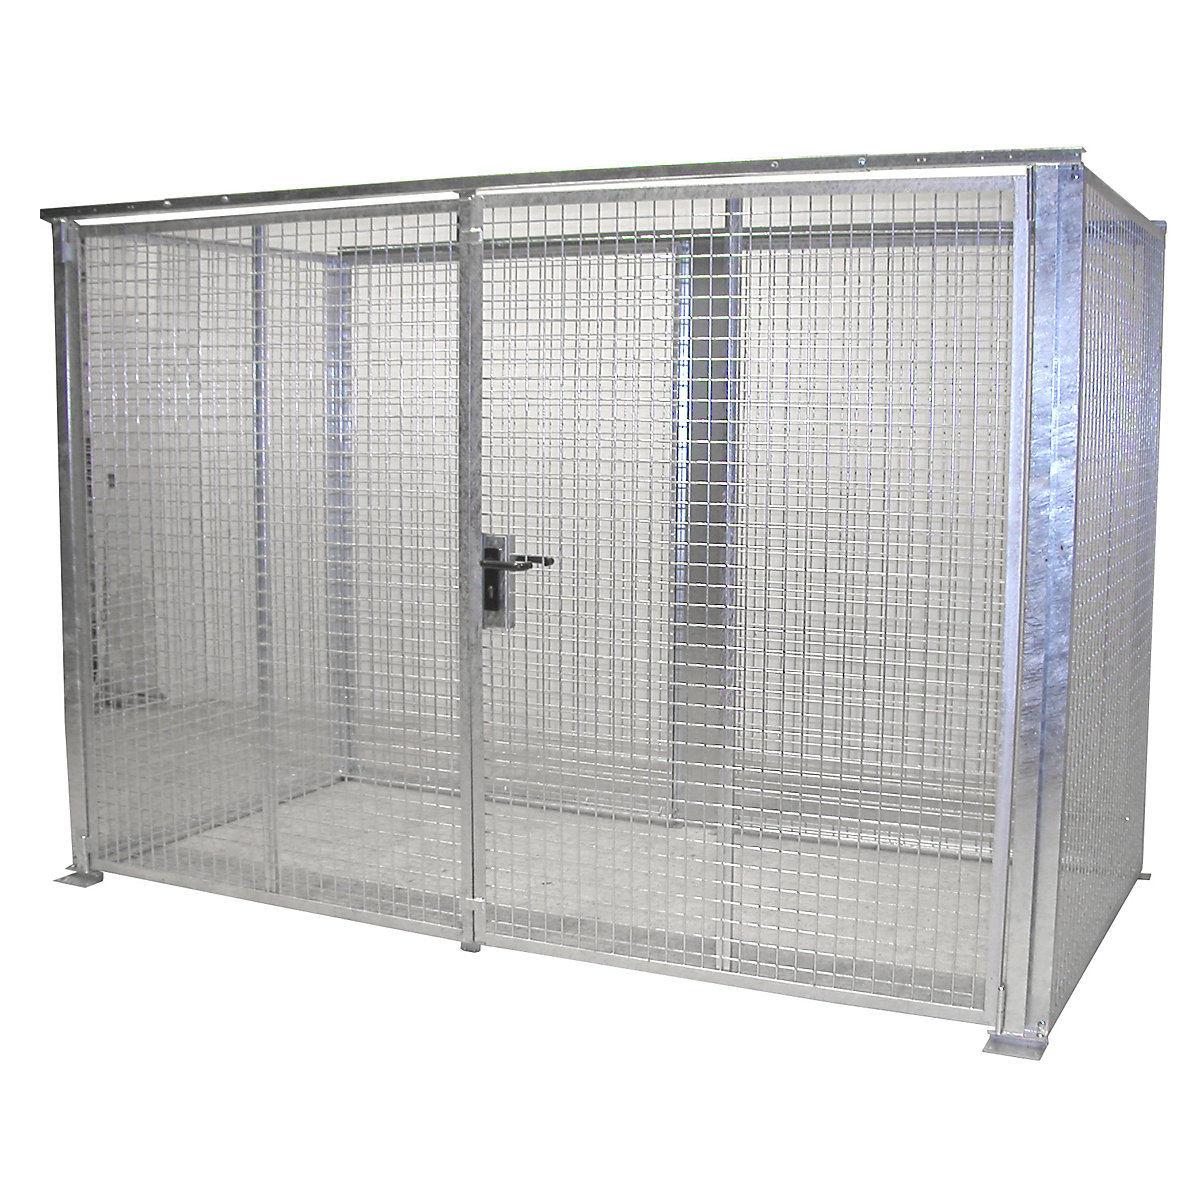 EUROKRAFTpro – Mesh gas cylinder cage, without roof, with double hinged doors, WxD 3100 x 1500 mm